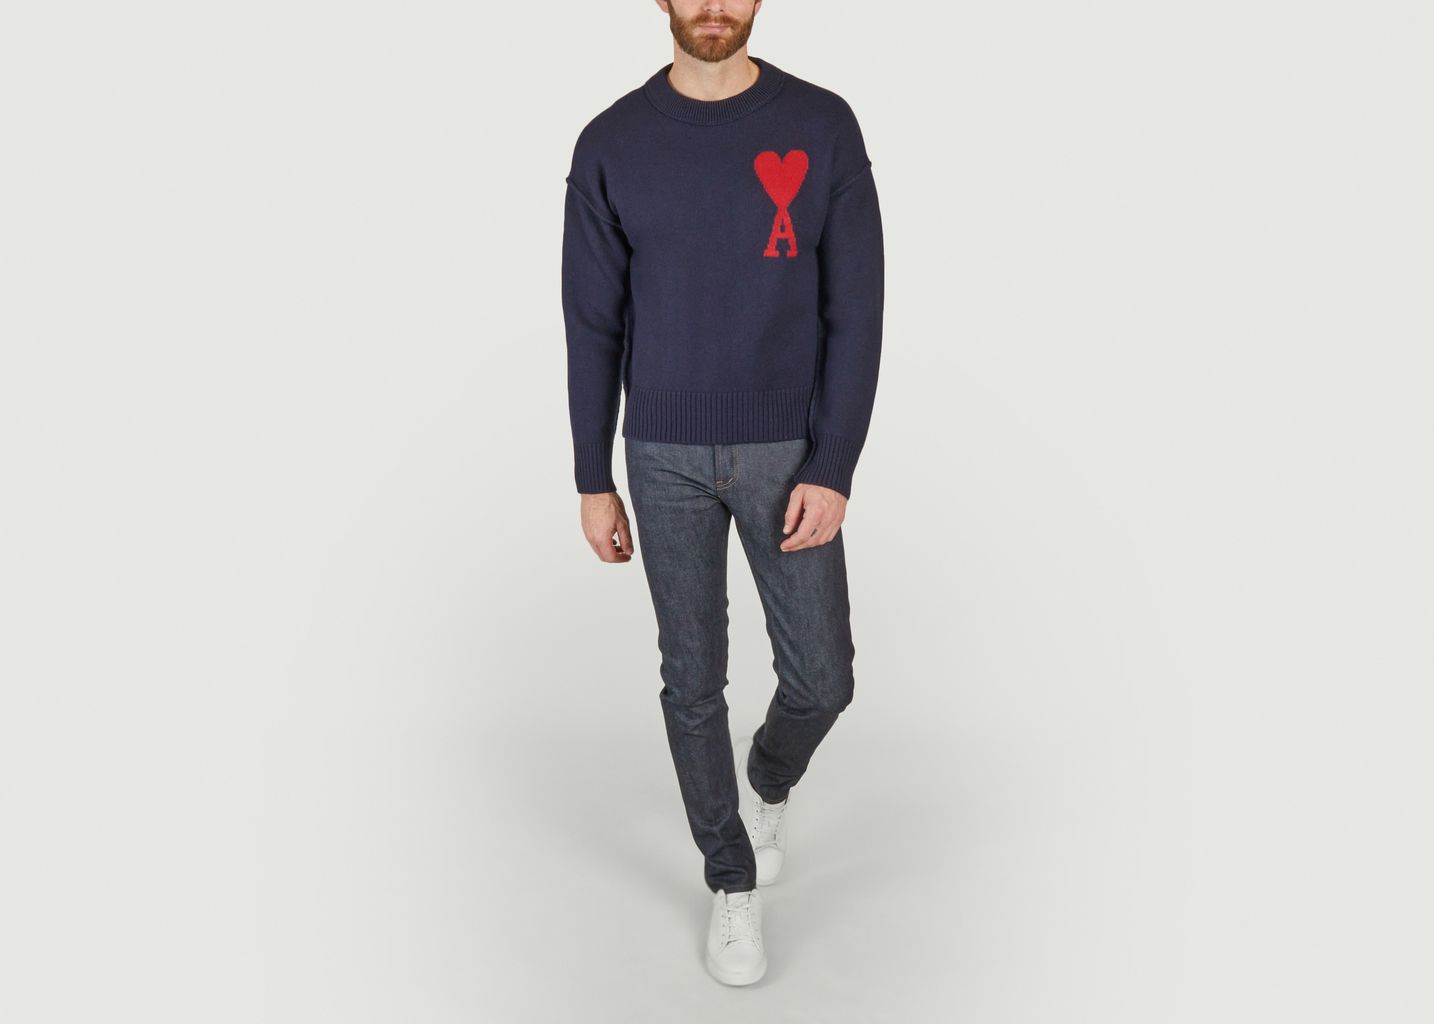 Pullover from ADC - AMI Paris